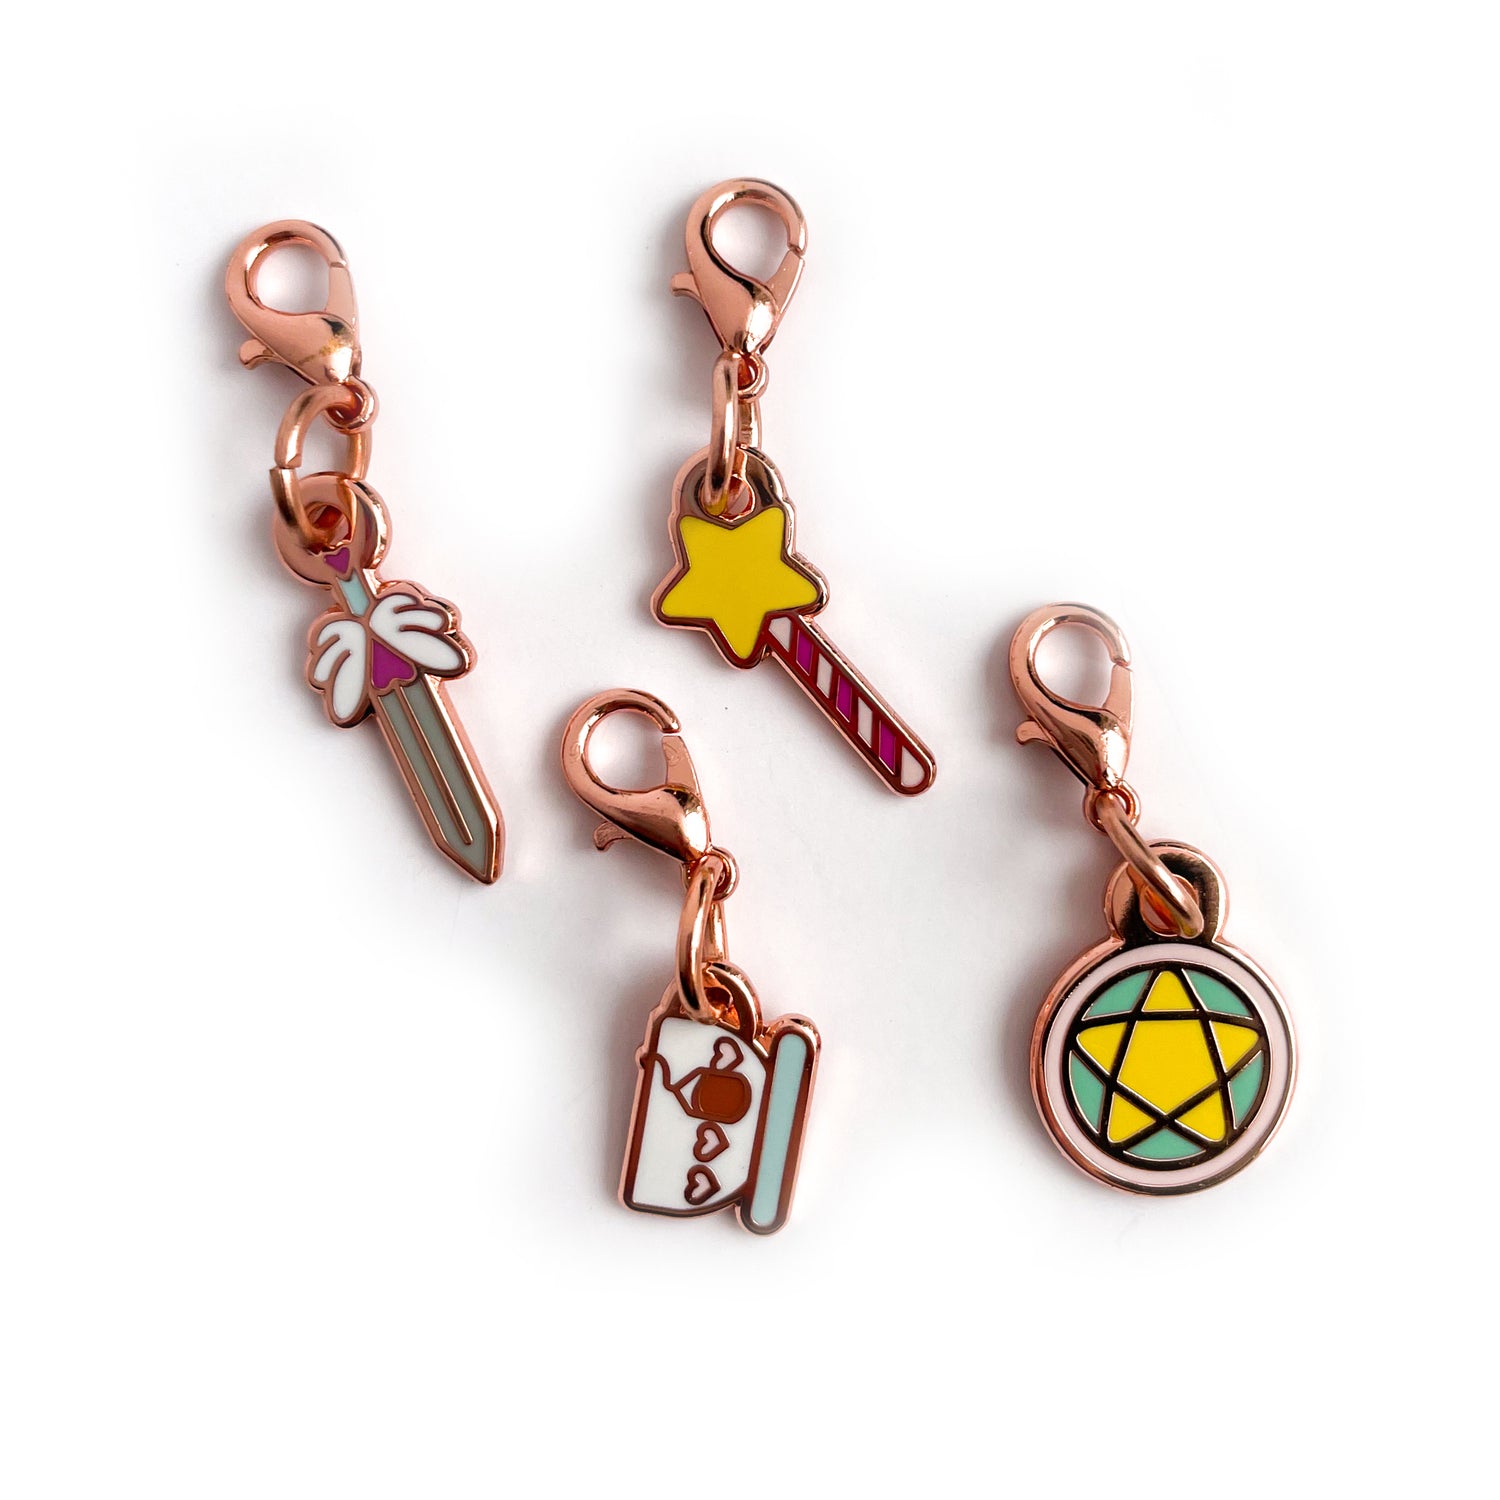 A collection of charms on a white background. The charms are shaped like a sword, a teacup, a wand, and a pentacle circle.